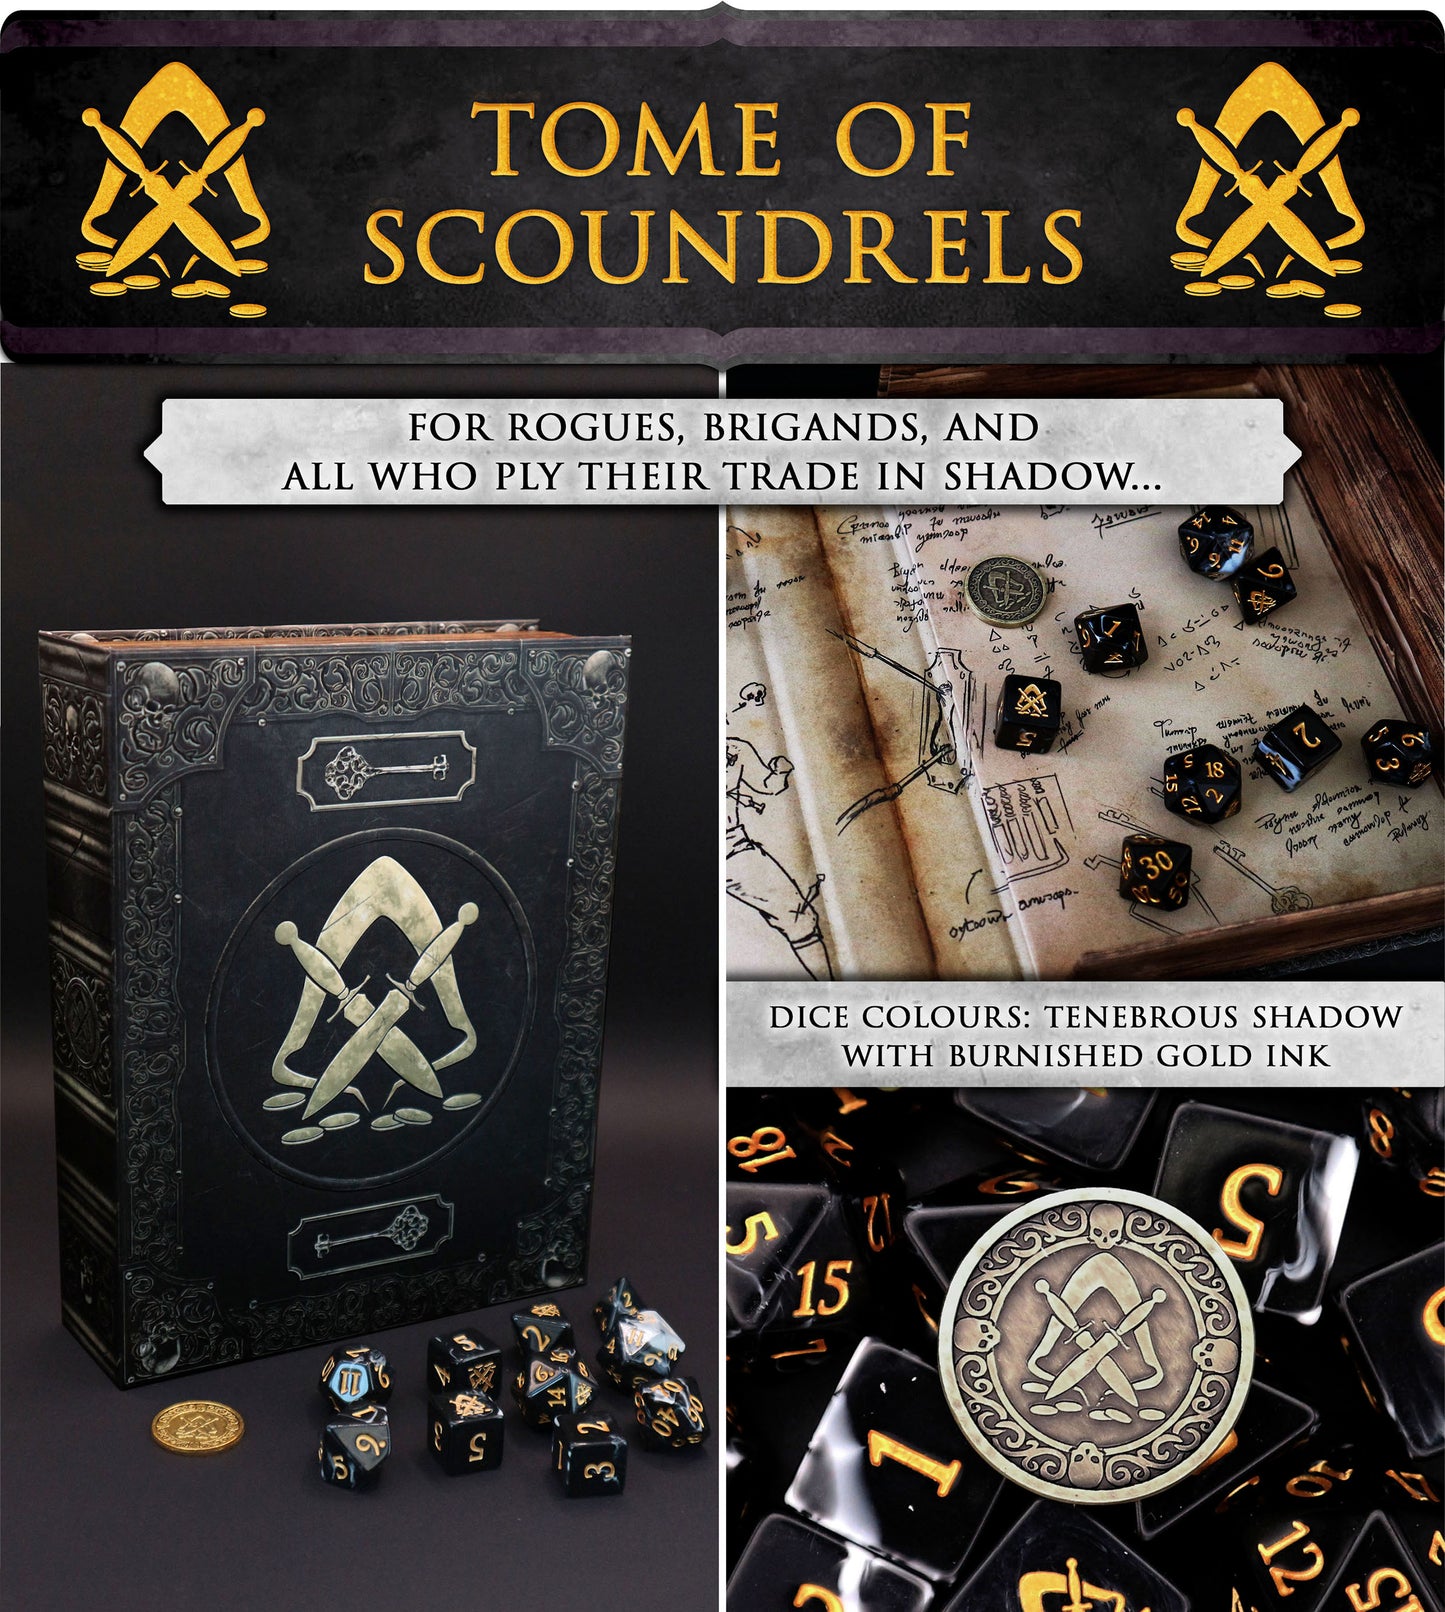 Tome of Scoundrels